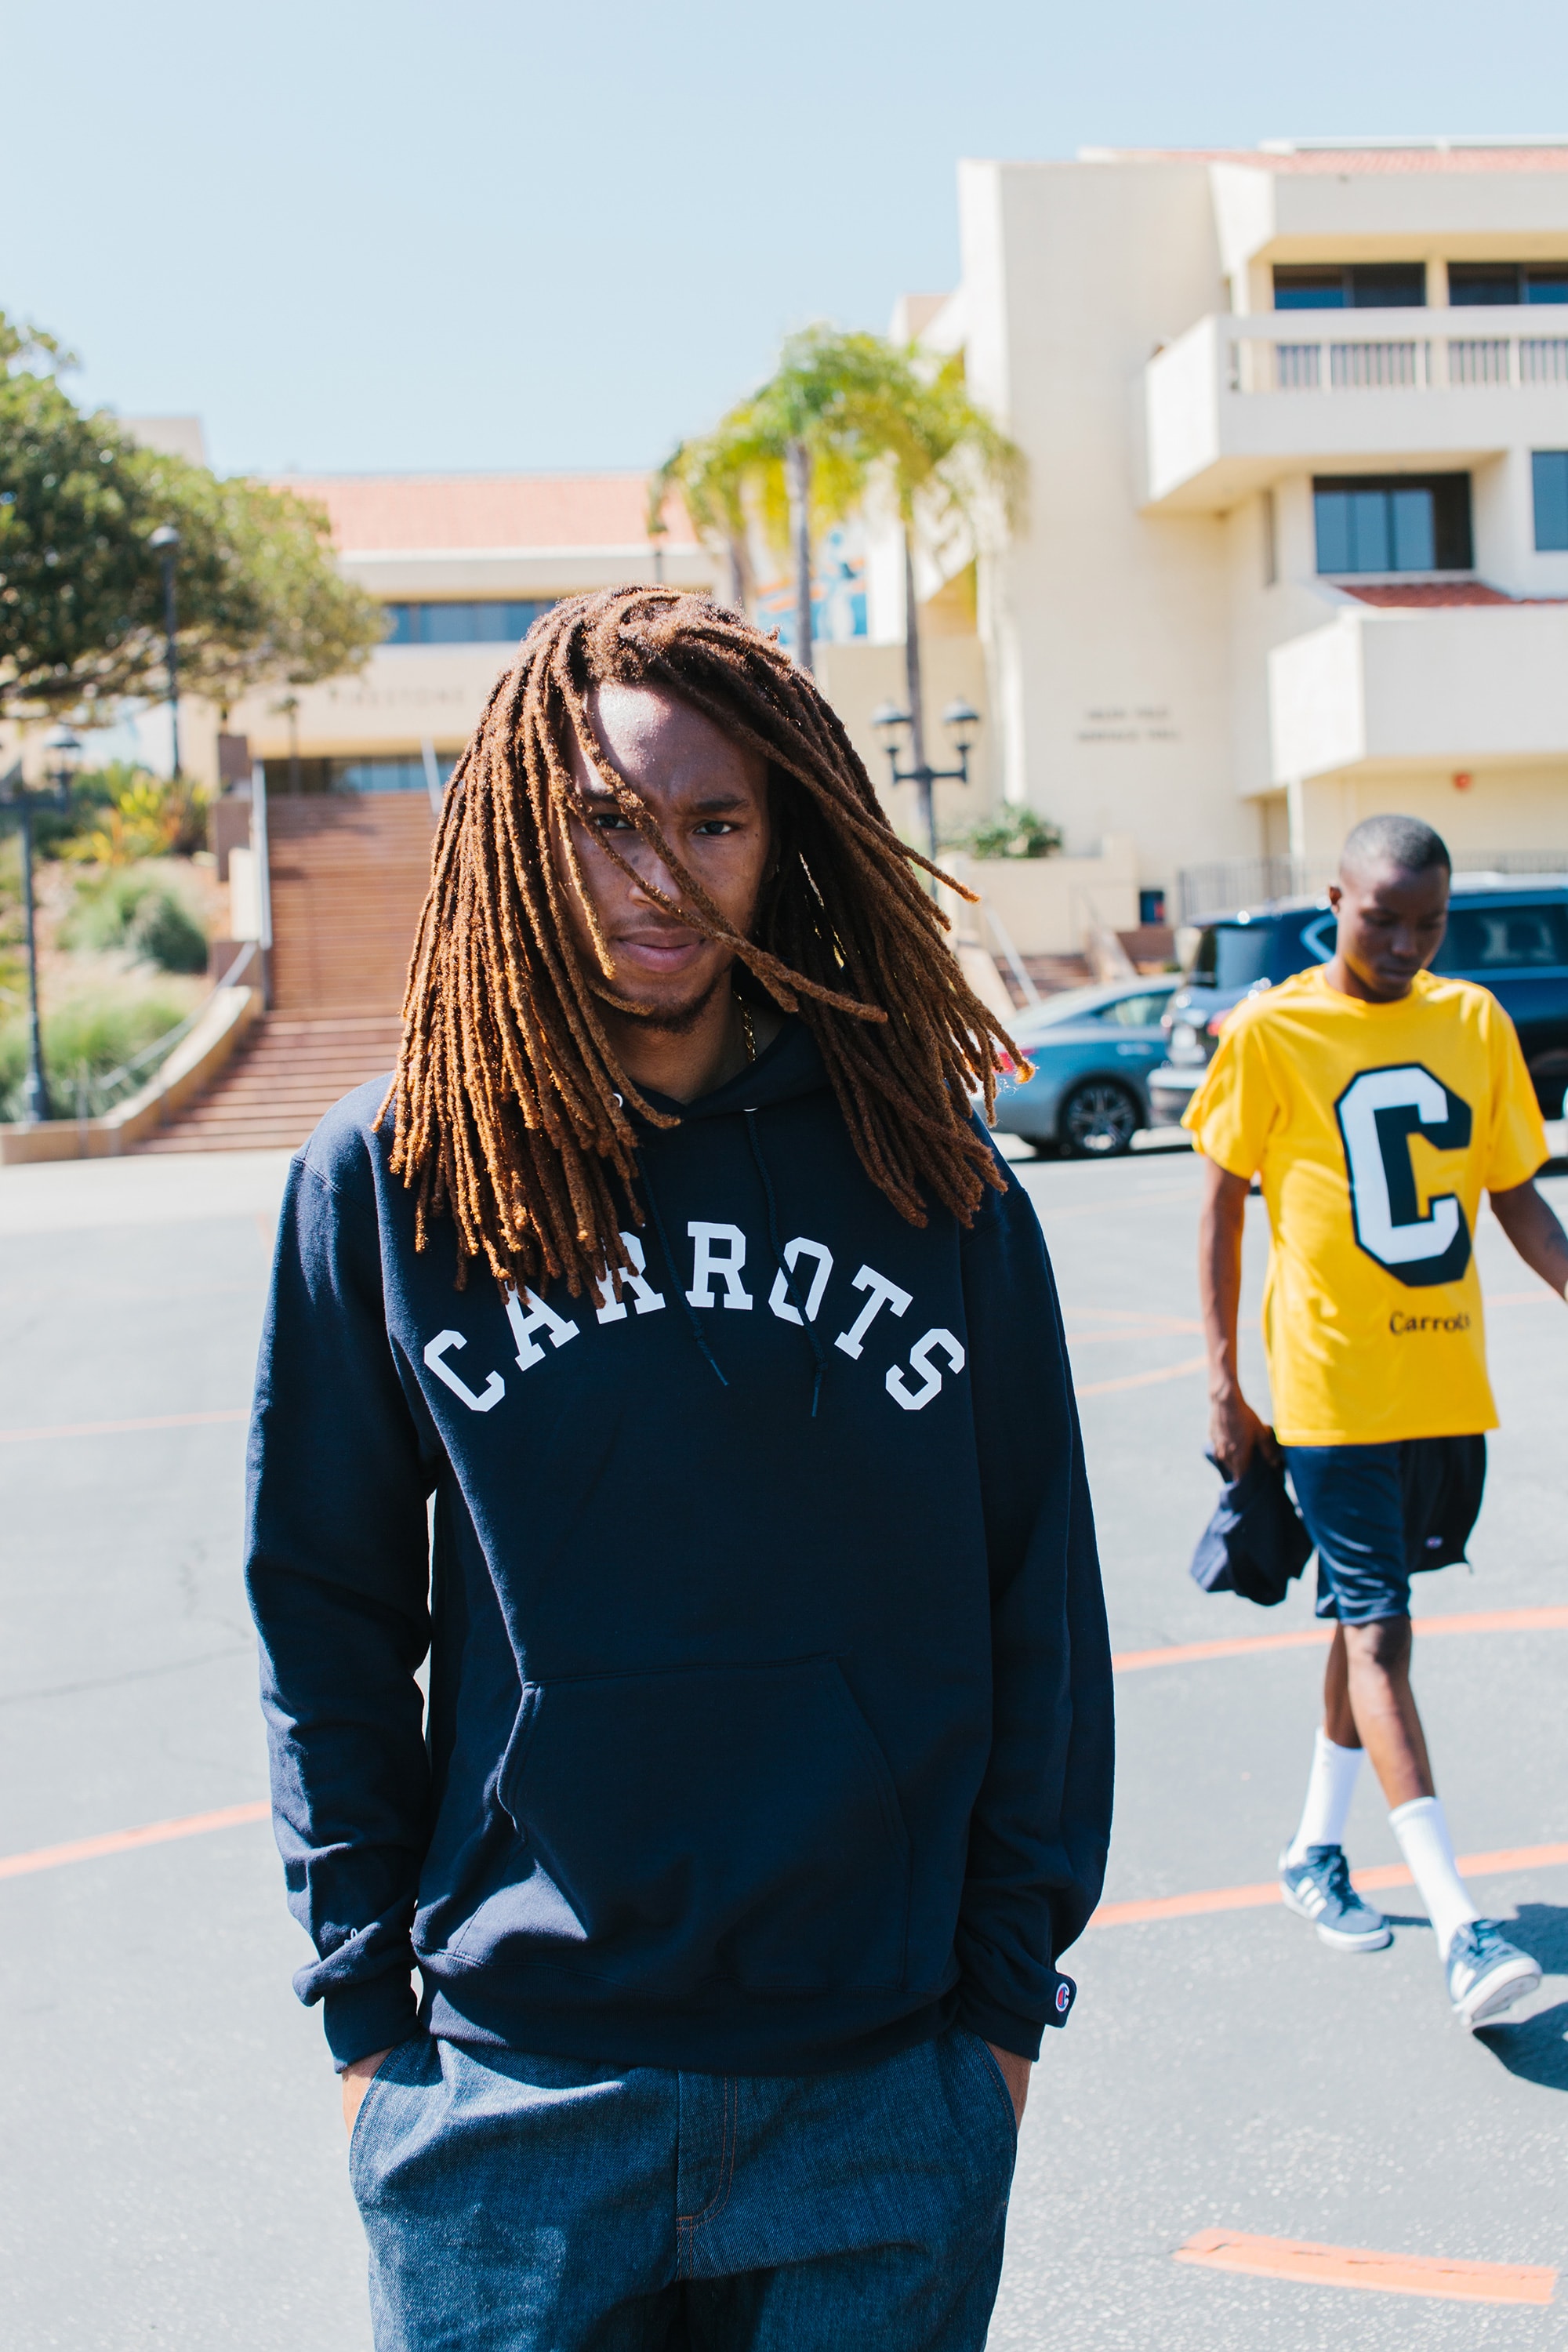 Carrots by Anwar Carrots x Champion 2018 聯名別注系列 Lookbook